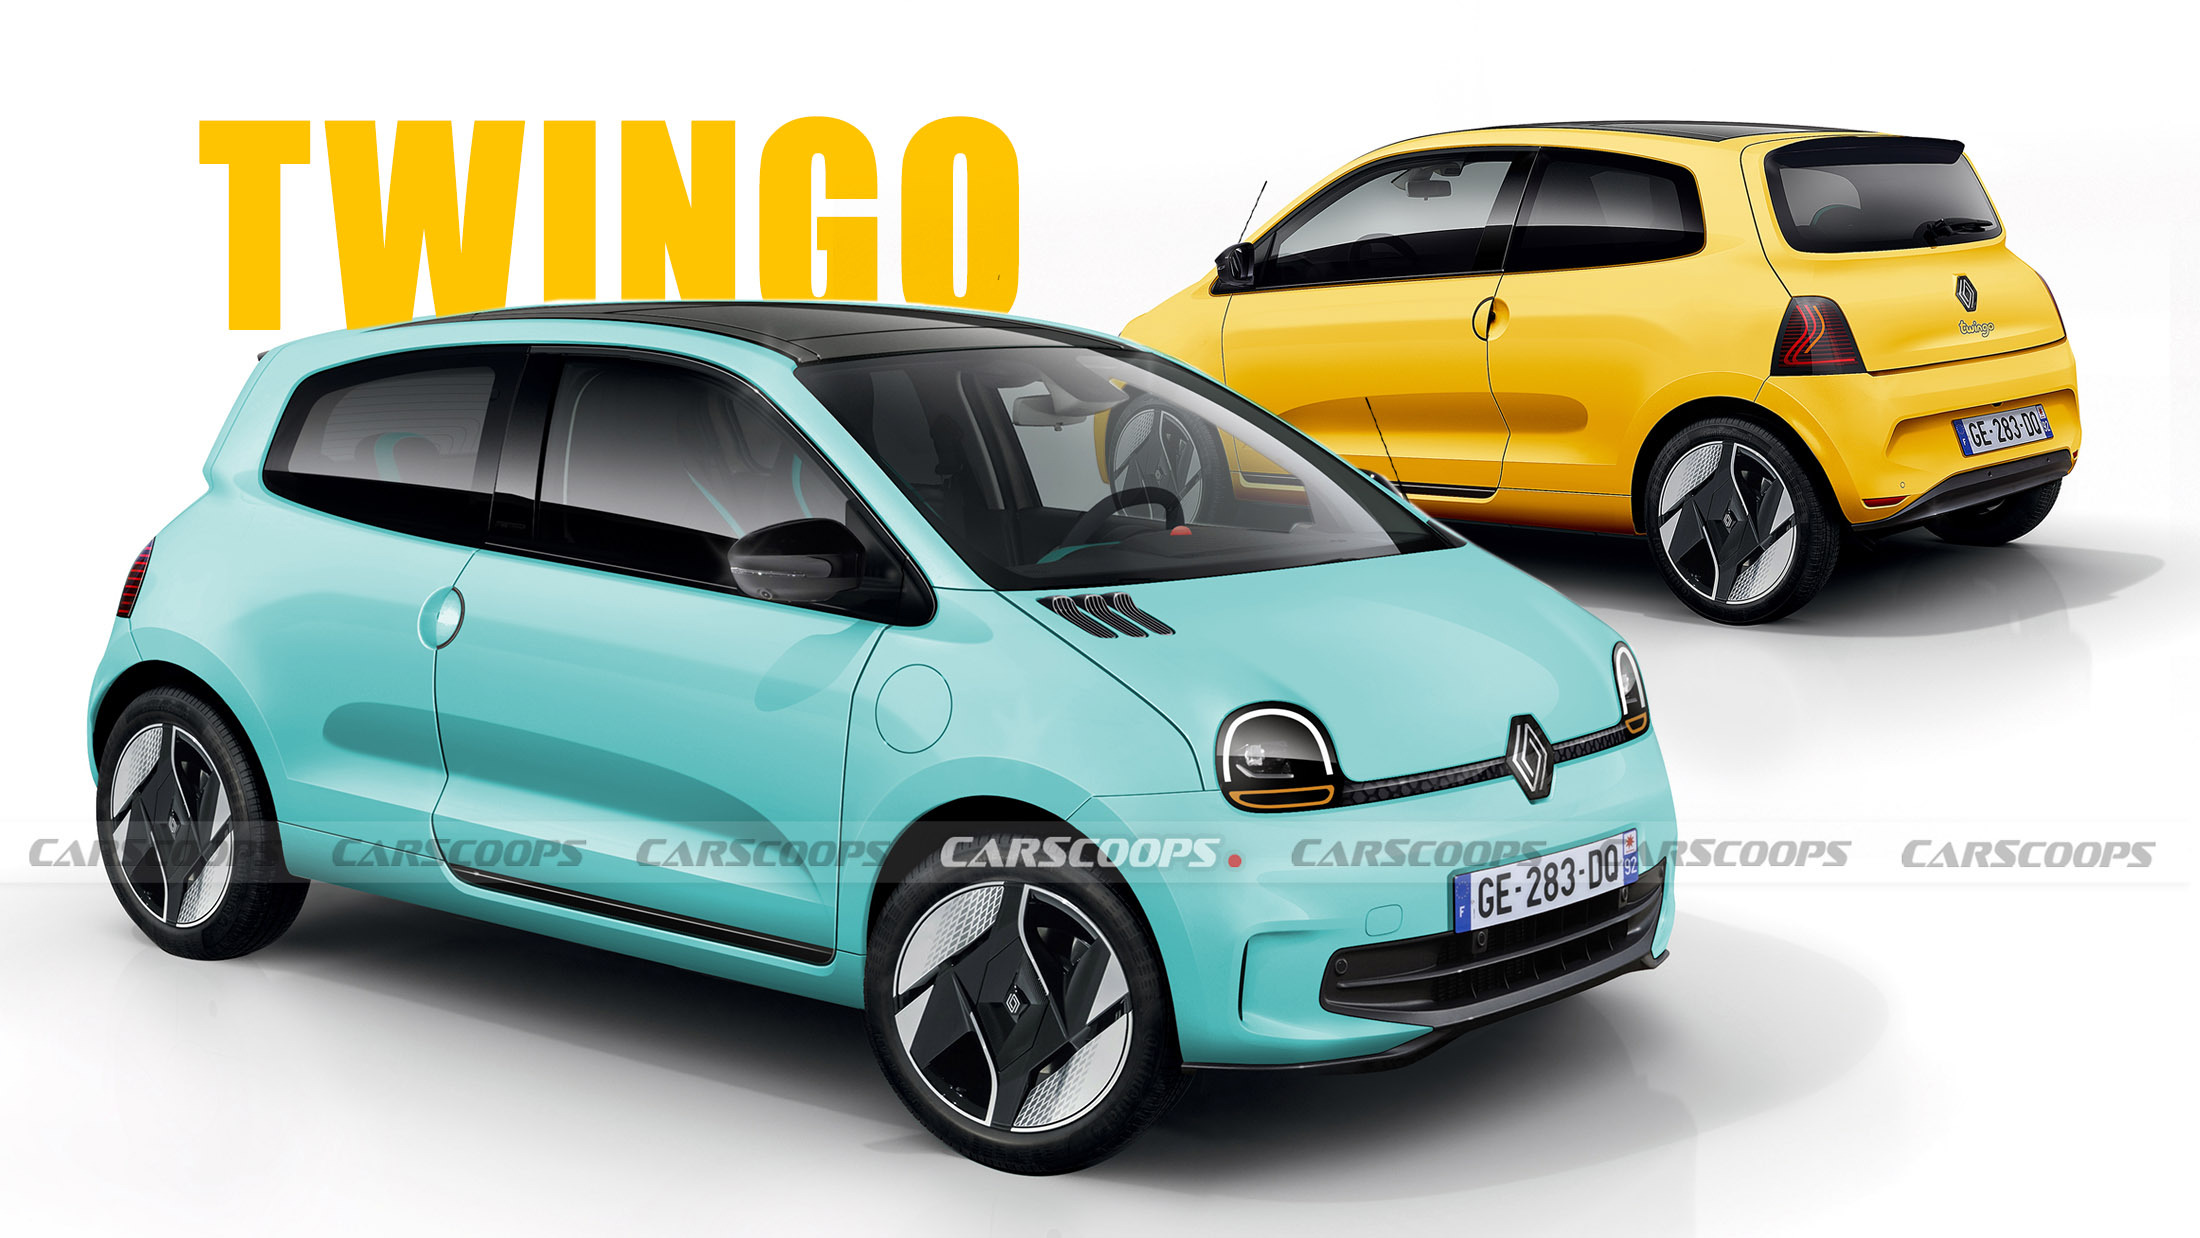 A Modern Reimagining of the 30-Year-Old Renault Twingo